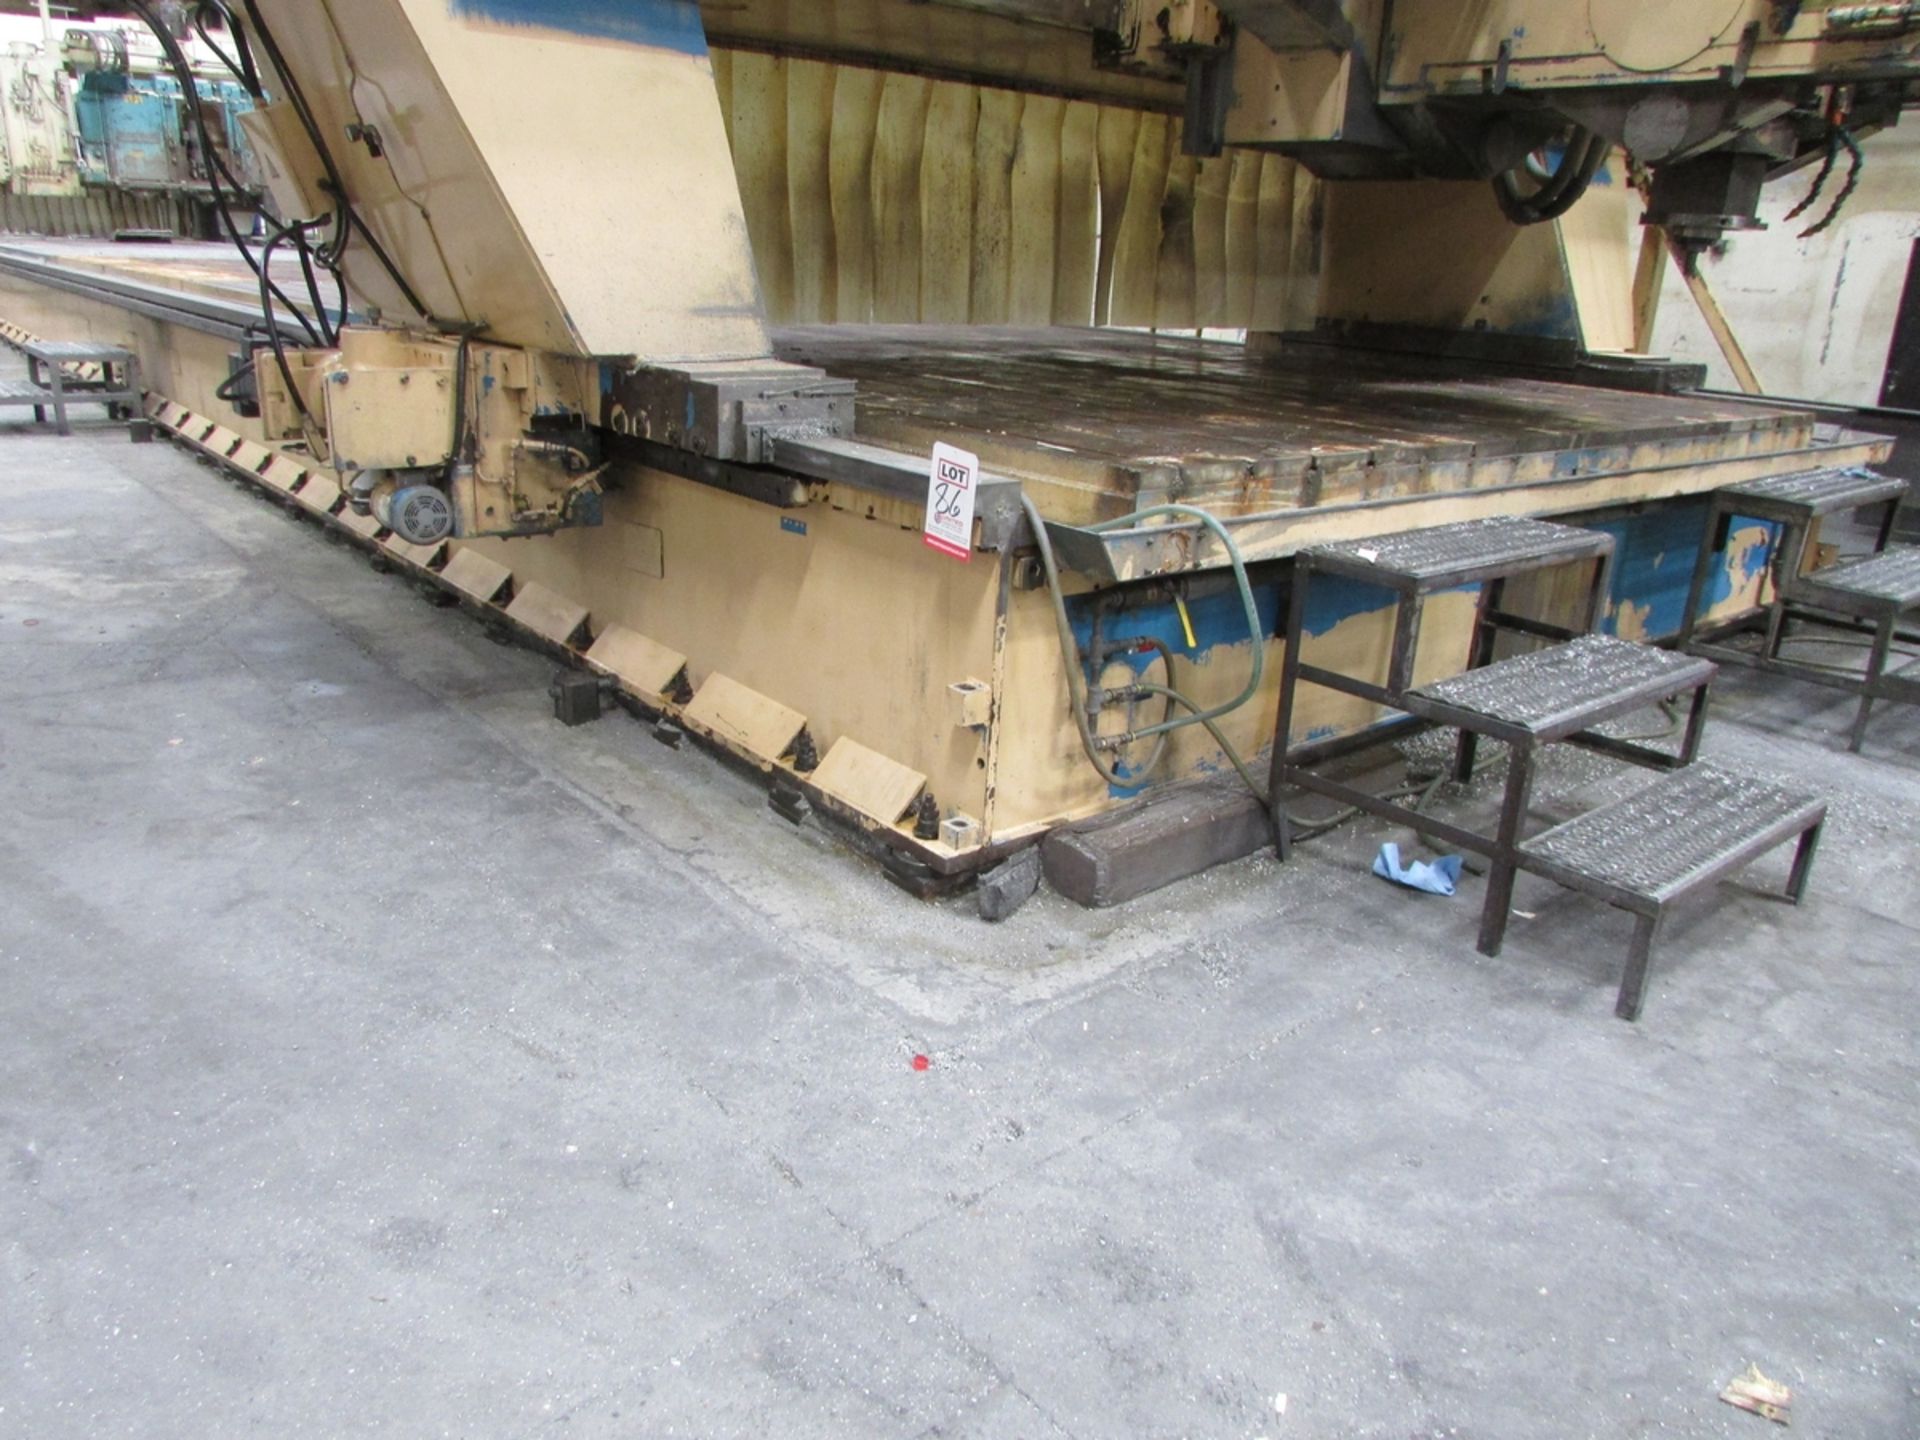 T-SLOTTED GANTRY MILL TABLE, 120' X 160", 125' BEDWAY LENGTH